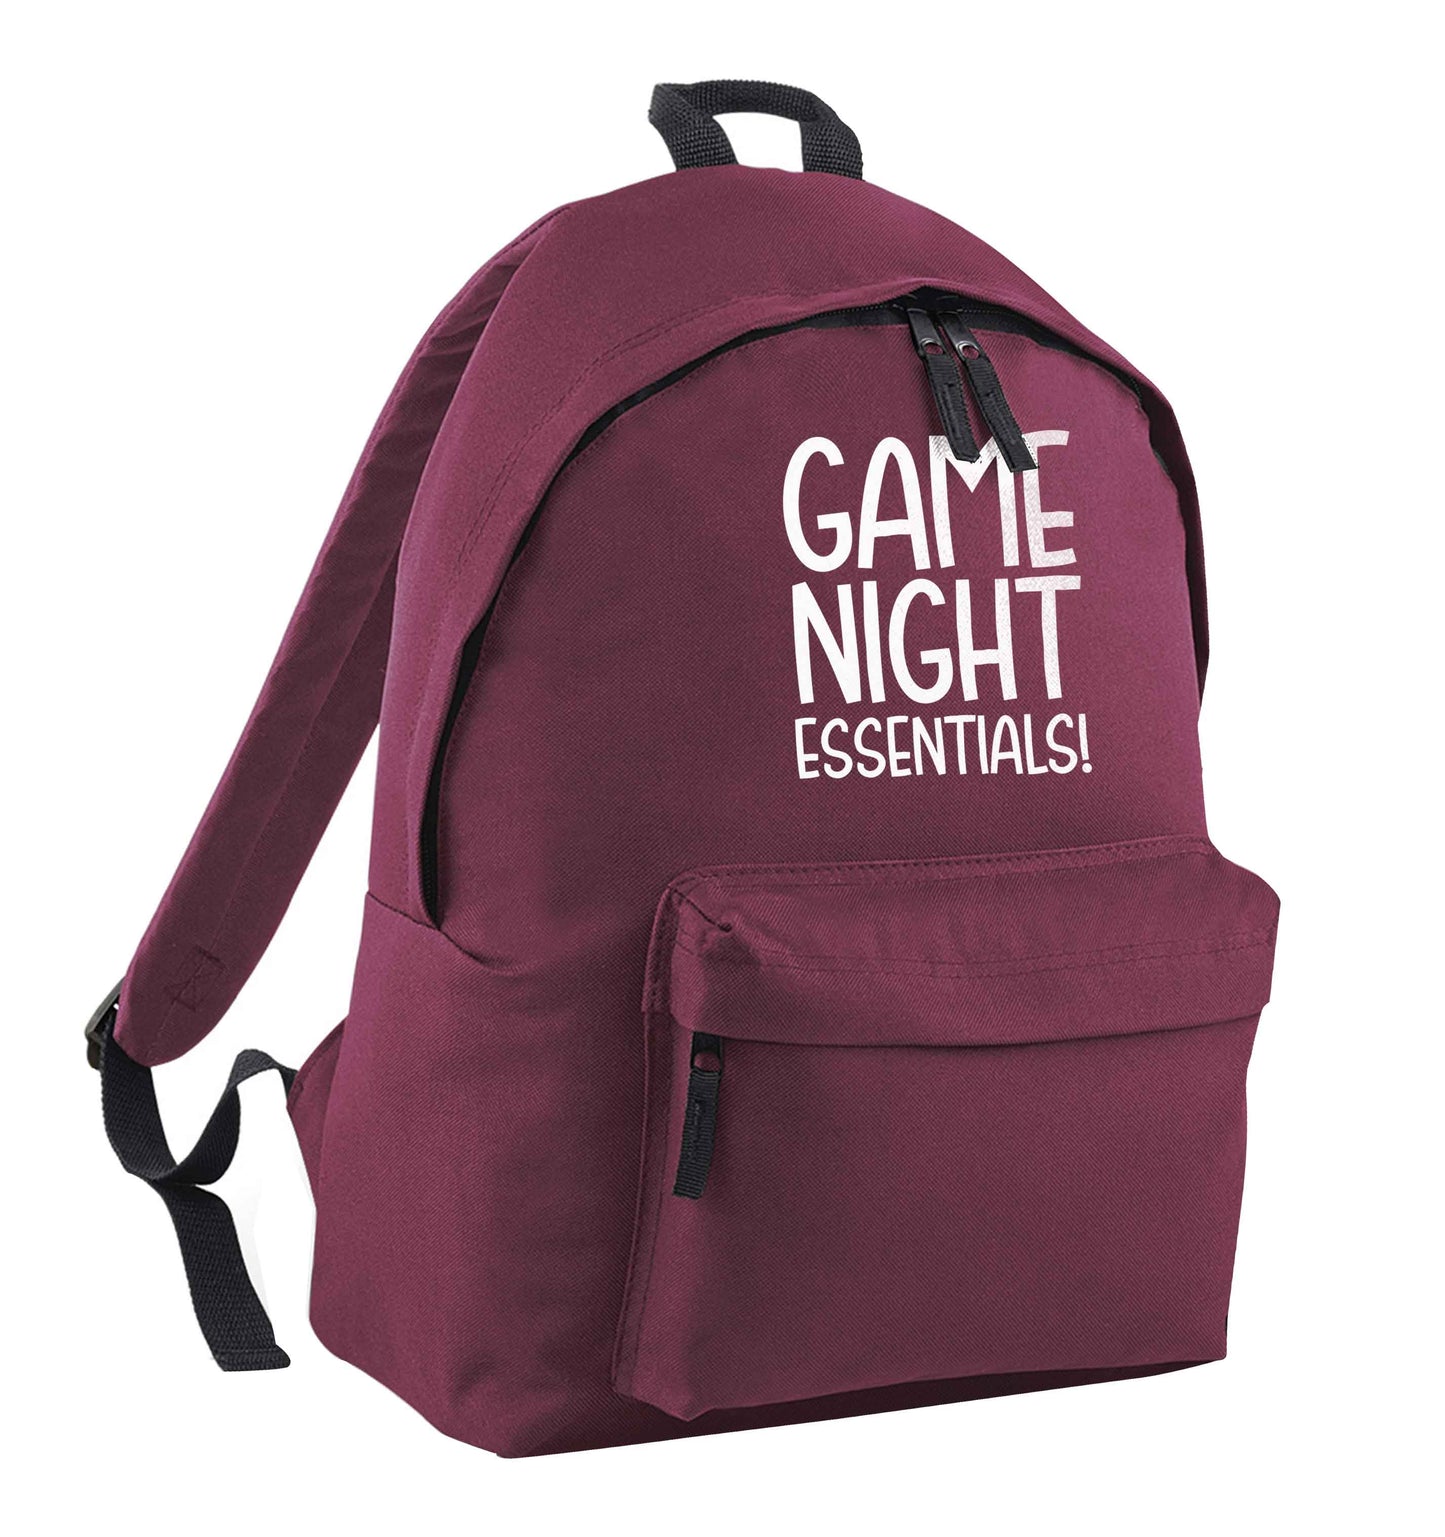 Game night essentials maroon adults backpack